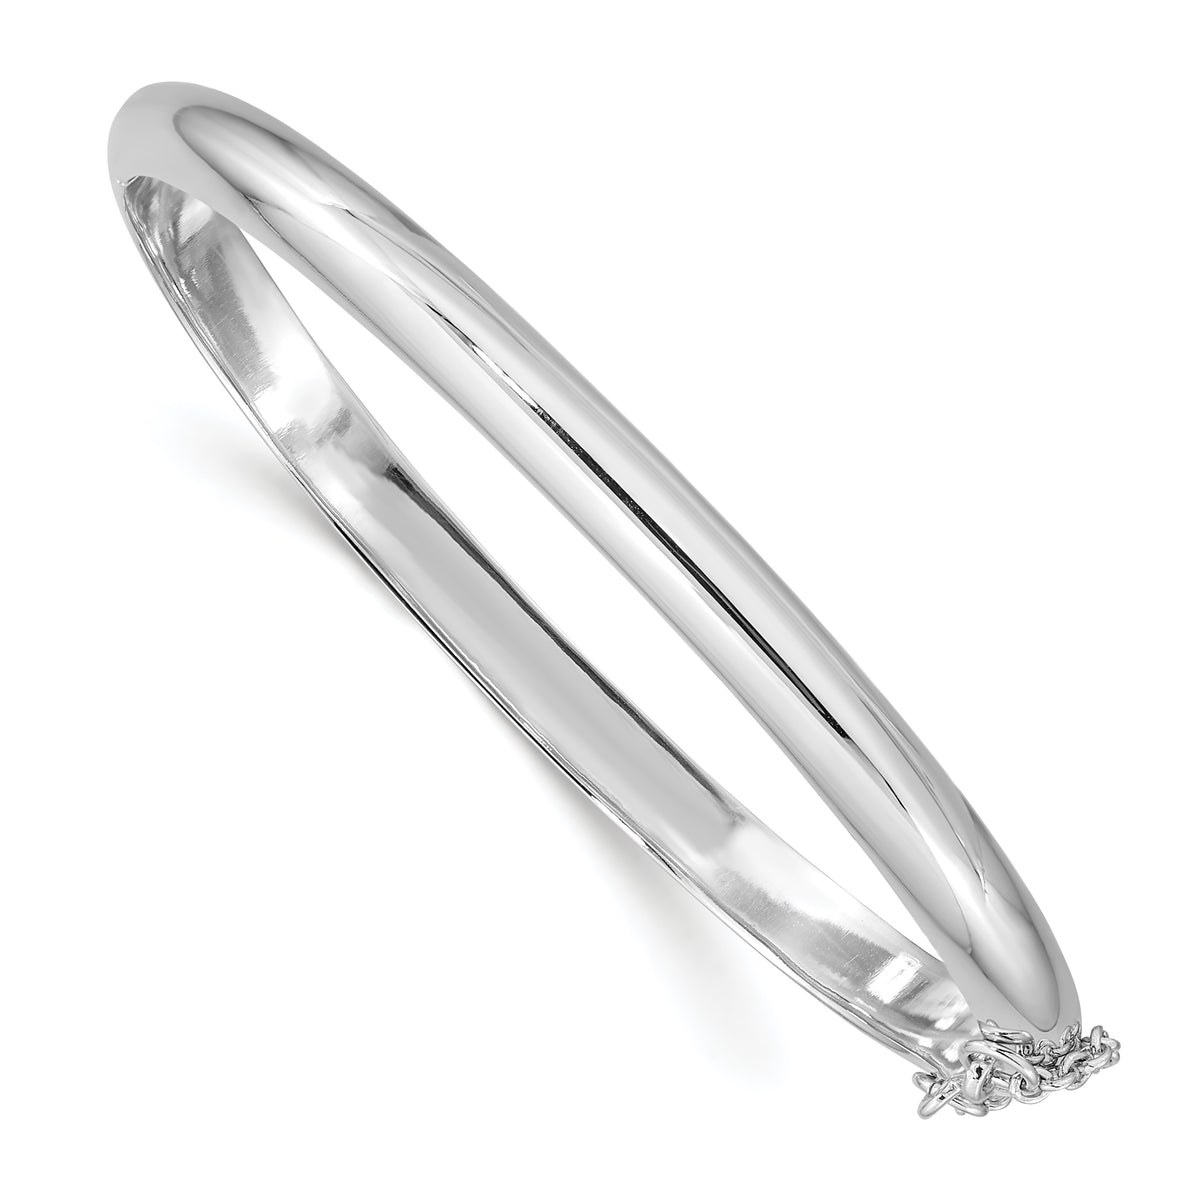 Sterling Silver Rhodium-plated 5mm w/Chain Hinged Bangle